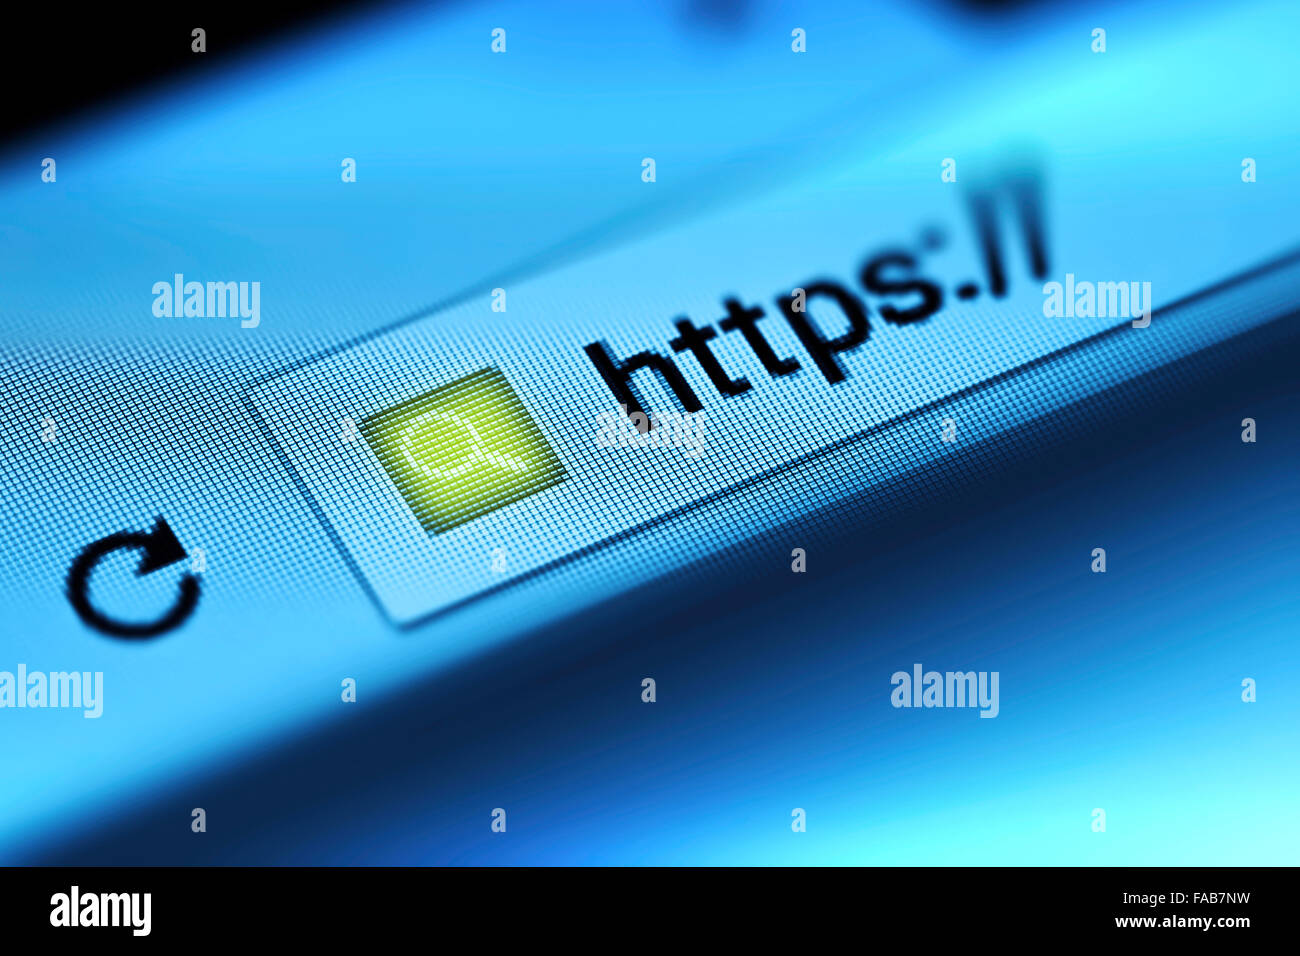 Https (hyper text transfer protocol secure) on an internet search bar. Stock Photo